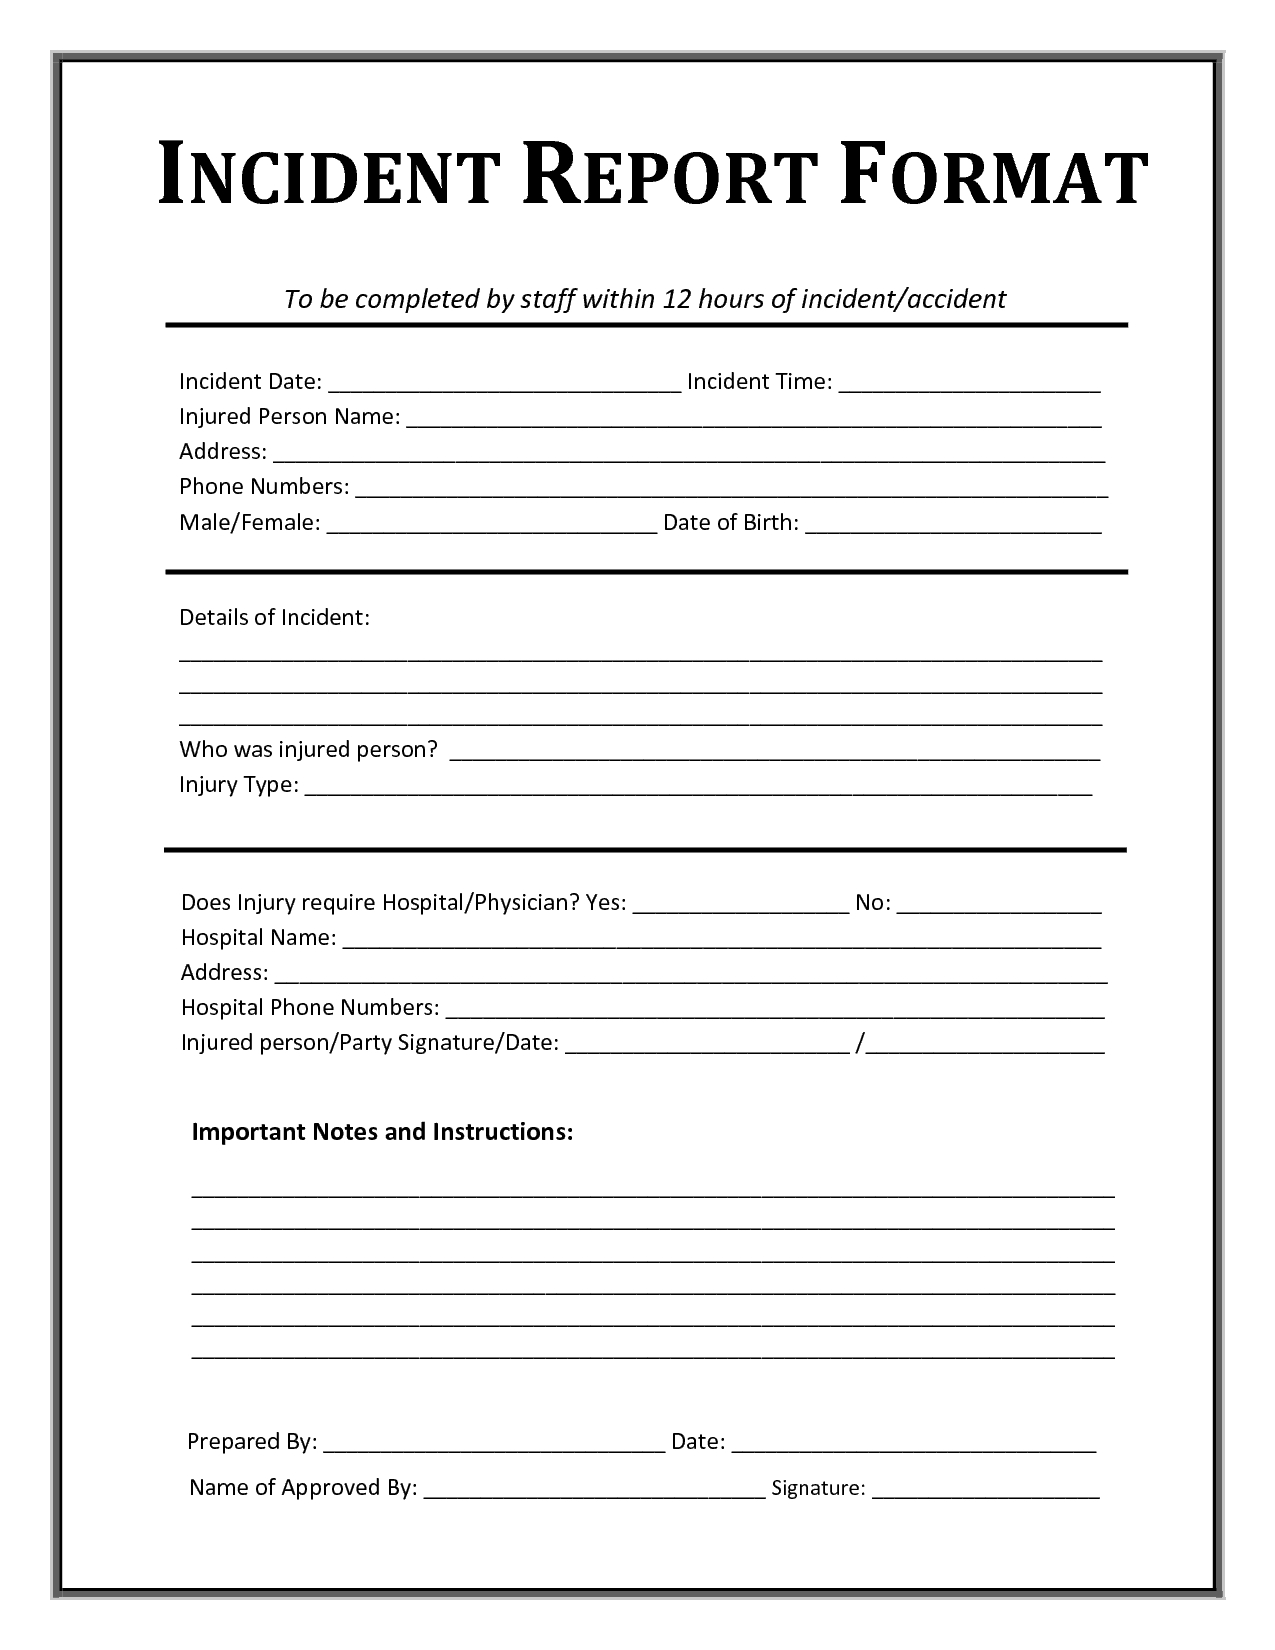 Format For An Incident Report - Yerde.swamitattvarupananda For Incident Report Form Template Word